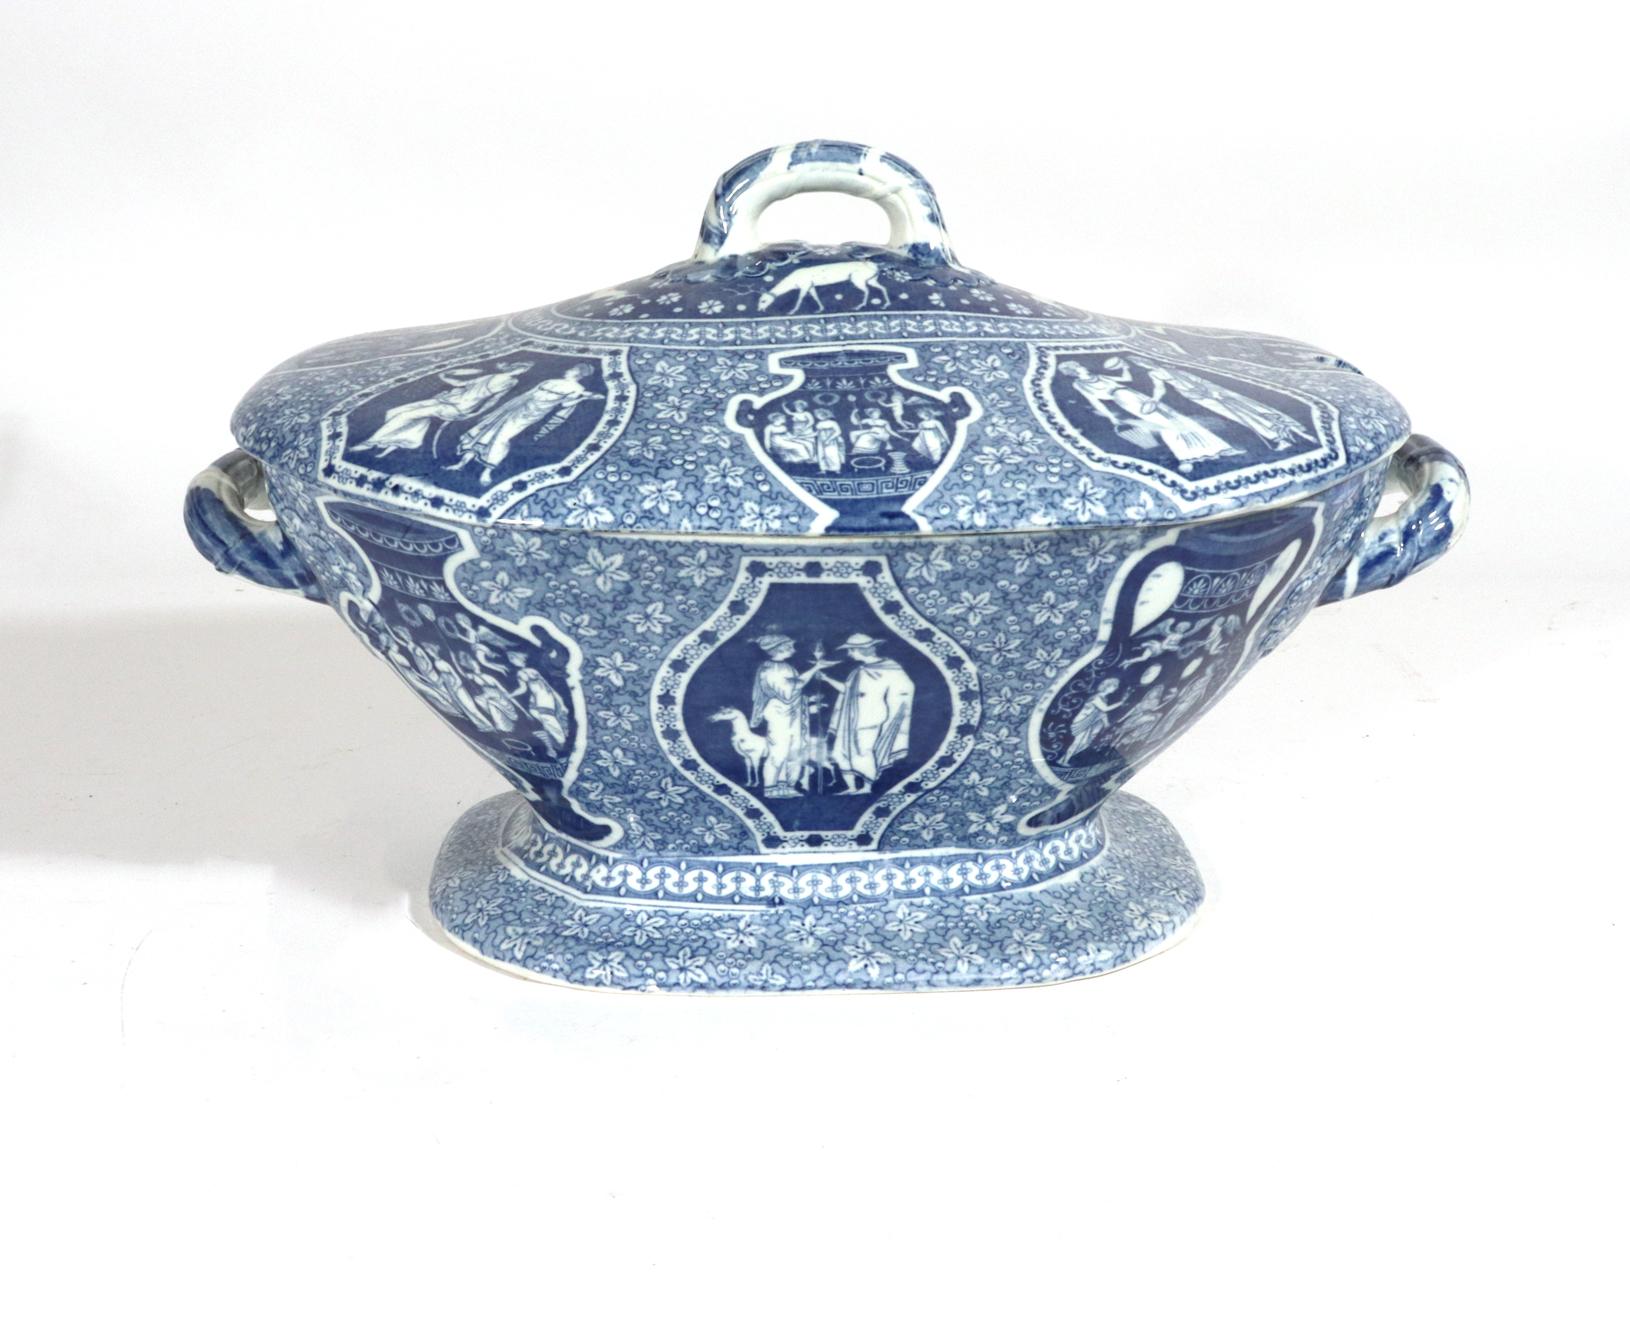 Herculaneum Pottery neo-classical Greek pattern blue soup tureen & cover
Early-19th century 

The Herculaneum Greek pattern pottery soup tureen and the cover are printed in blue with neo-classical scenes on panels and urns against a fruit and flower